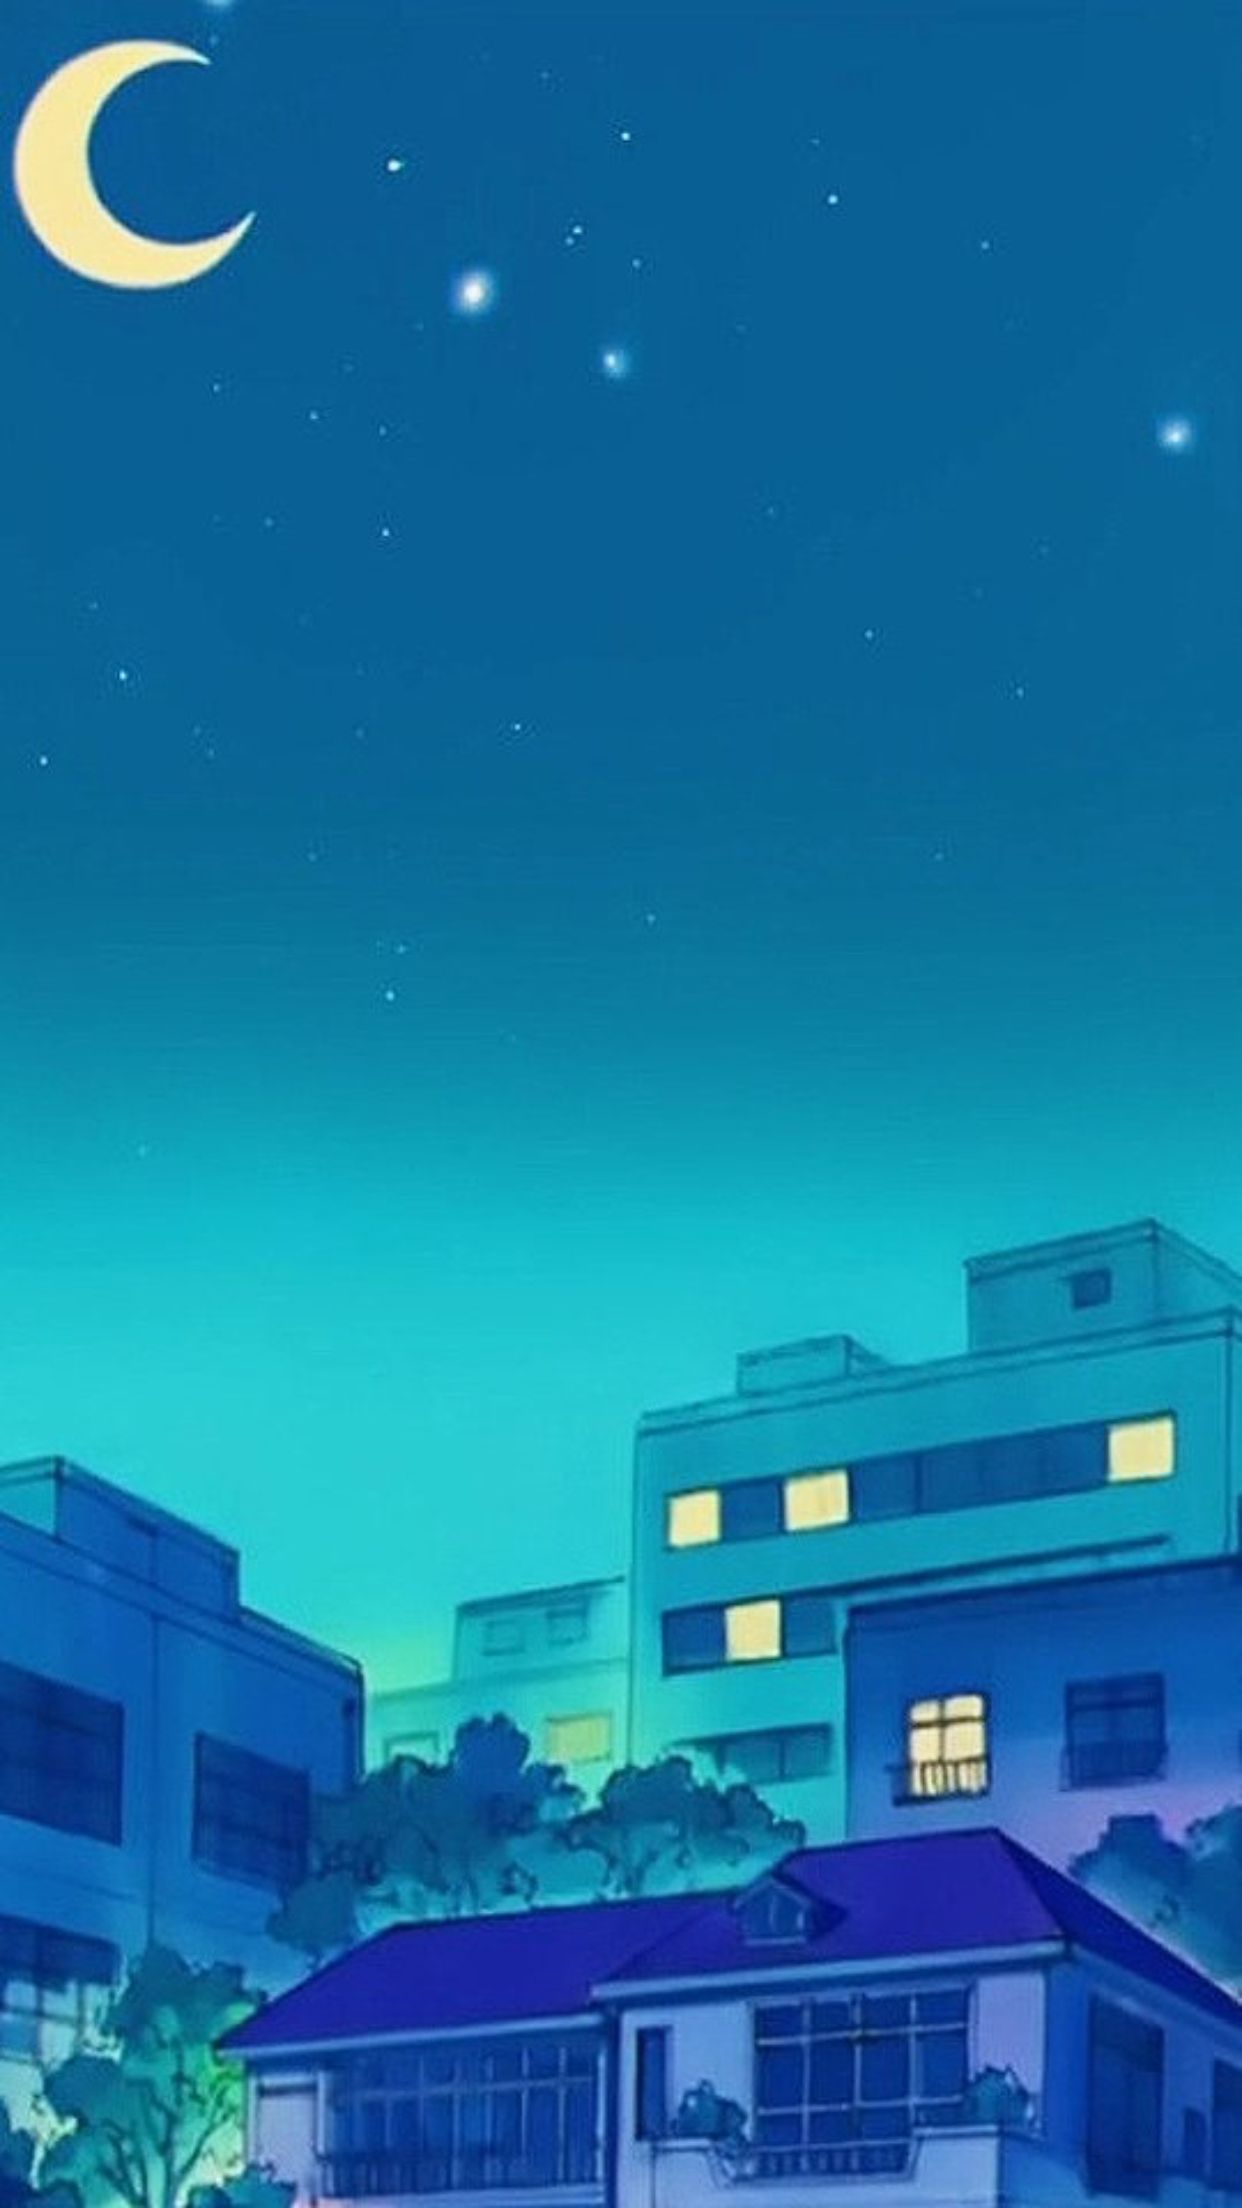 Anime Aesthetic Iphone Wallpapers